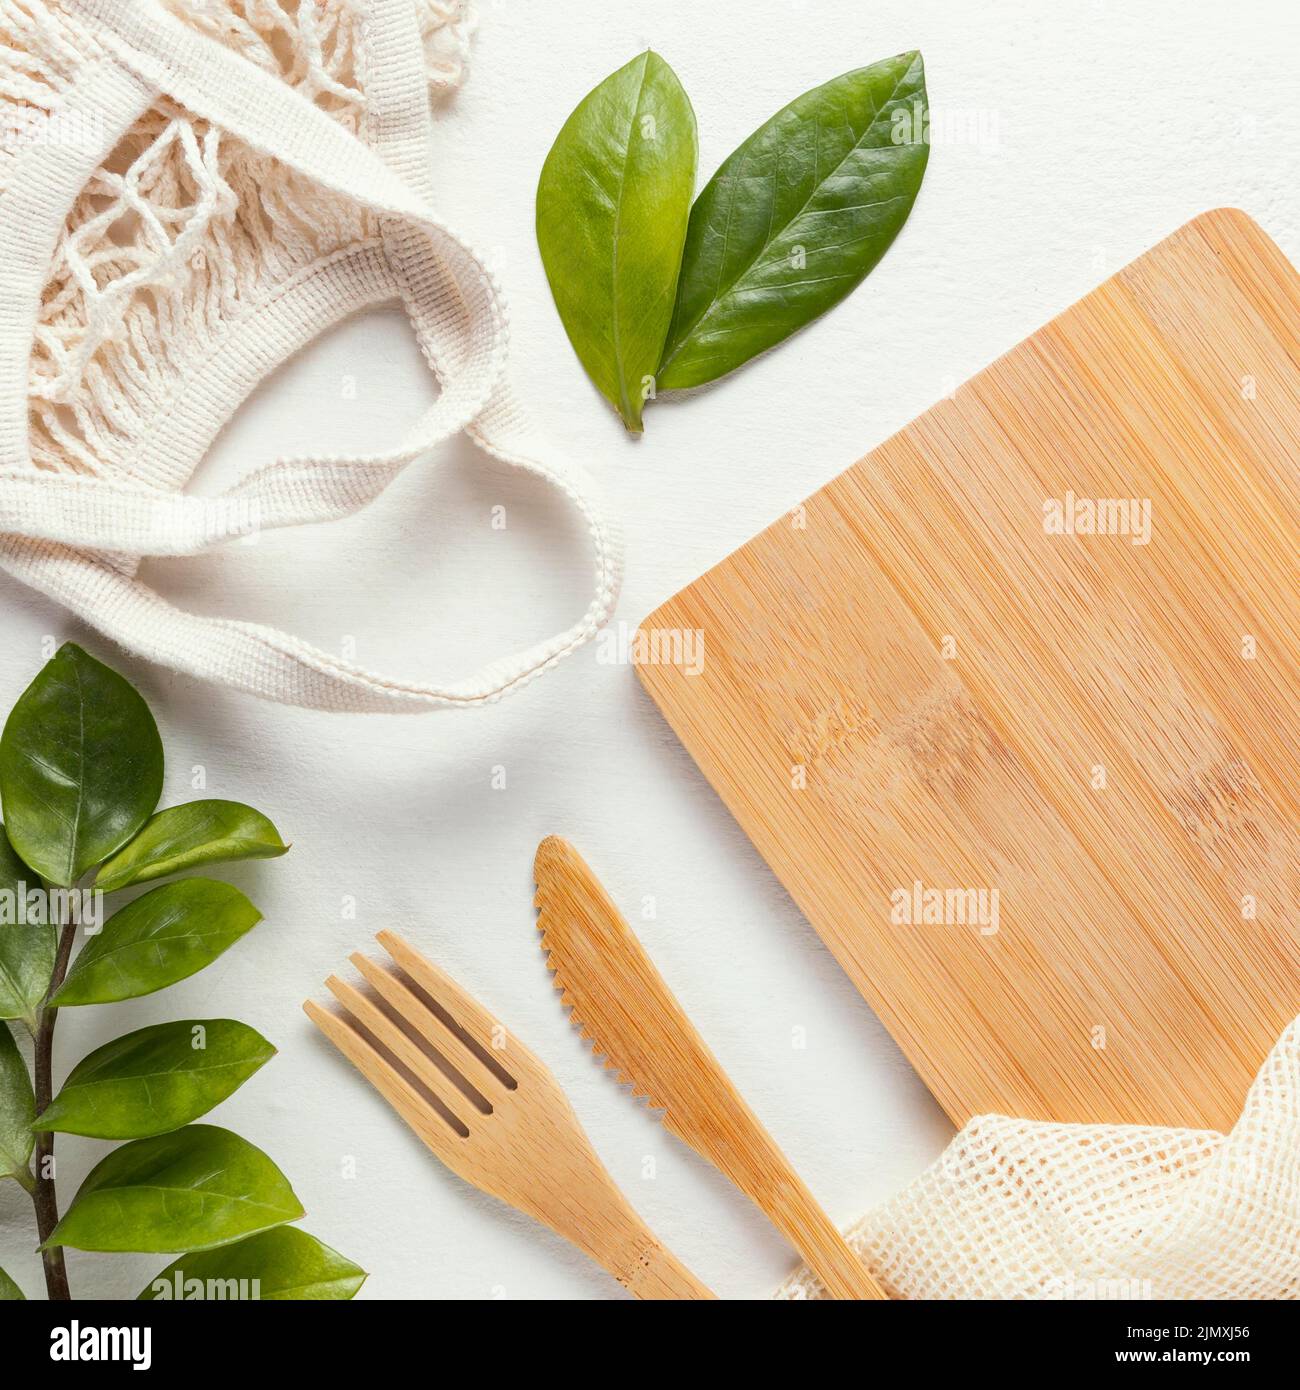 Wooden board with cutlery Stock Photo